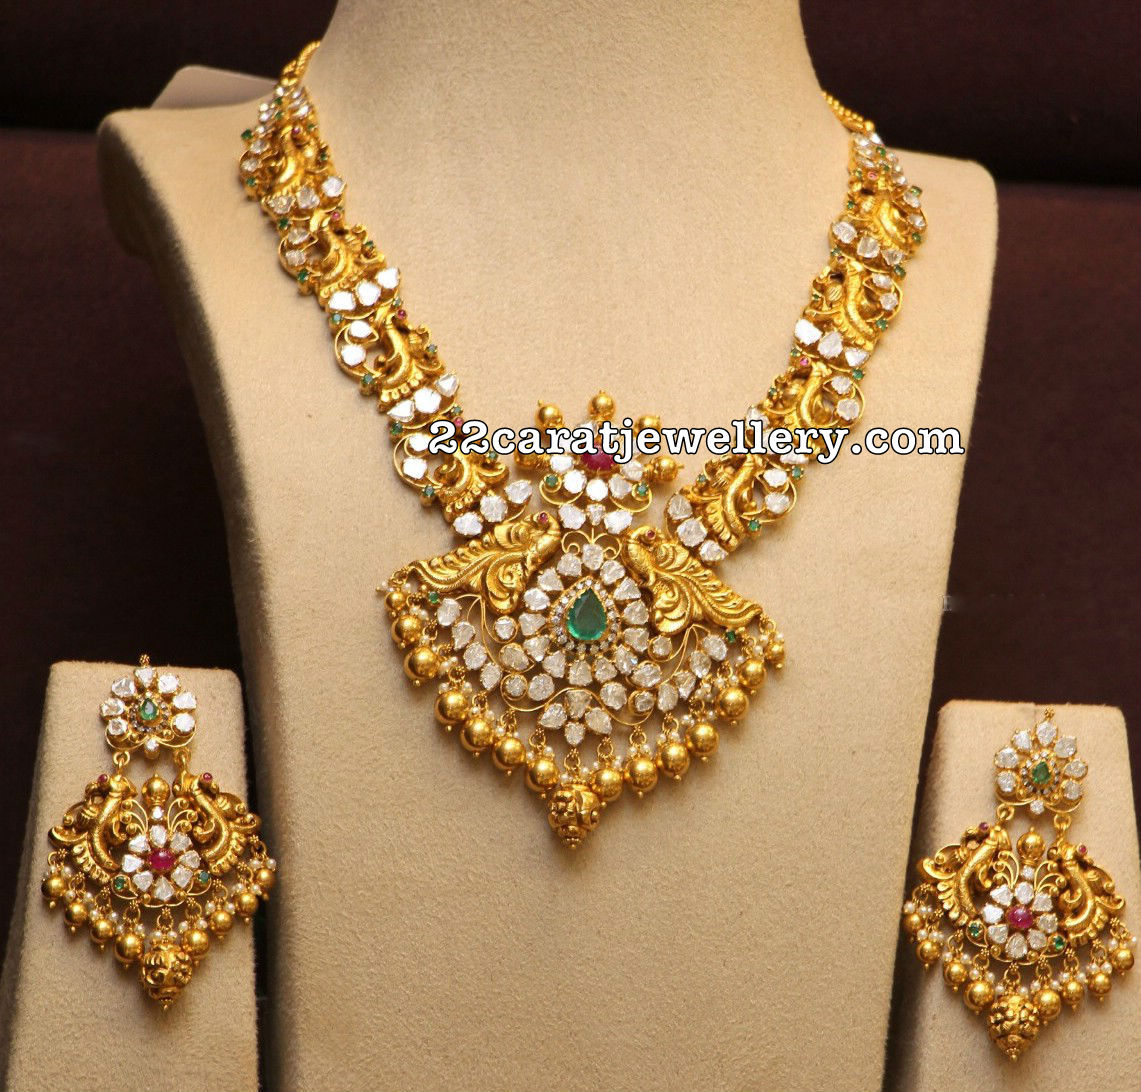 Pachi Necklace Large Earrings - Jewellery Designs